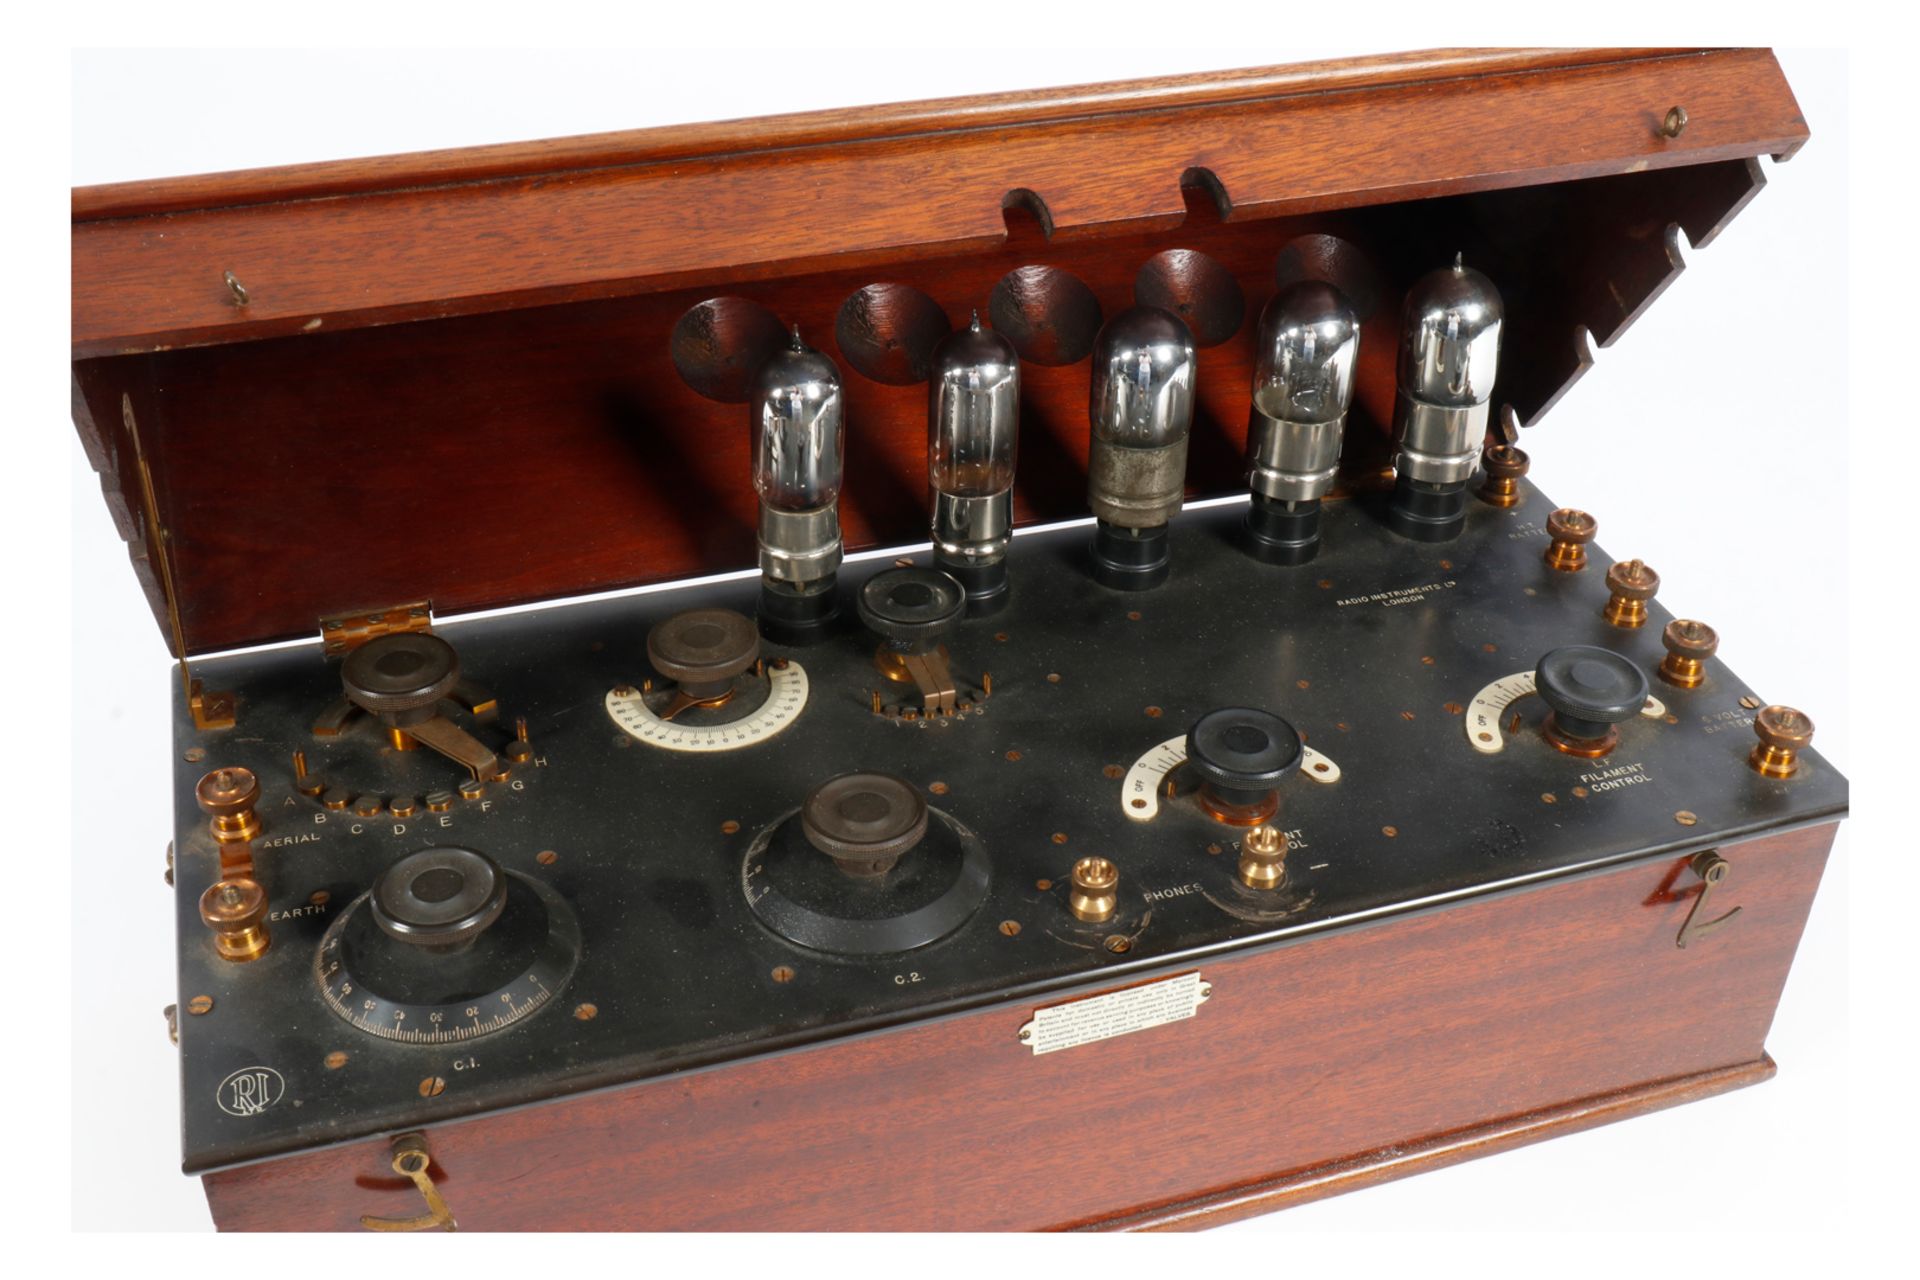 1922 RADIO INSTRUMENT (RI) 5 valves receiving set, varnished Mahogany cabinet with slope lid to - Image 2 of 5